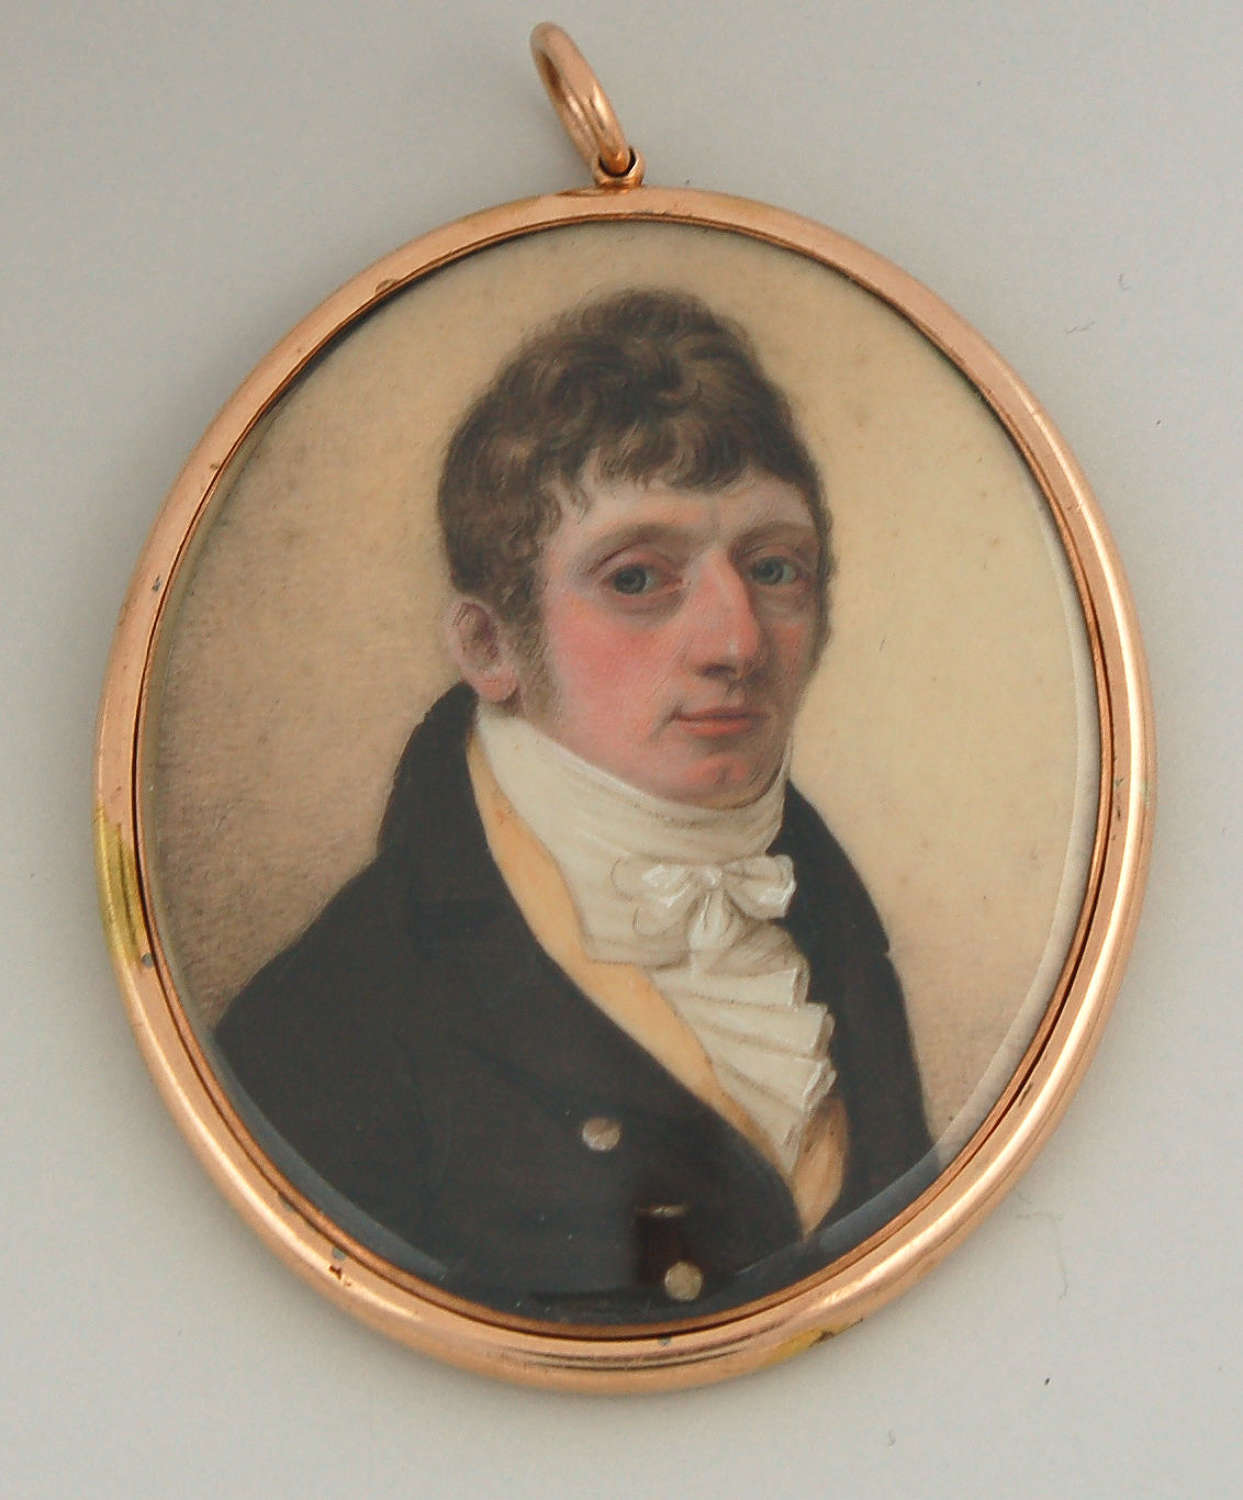 Miniature of gent attributed to A R Burt C1800